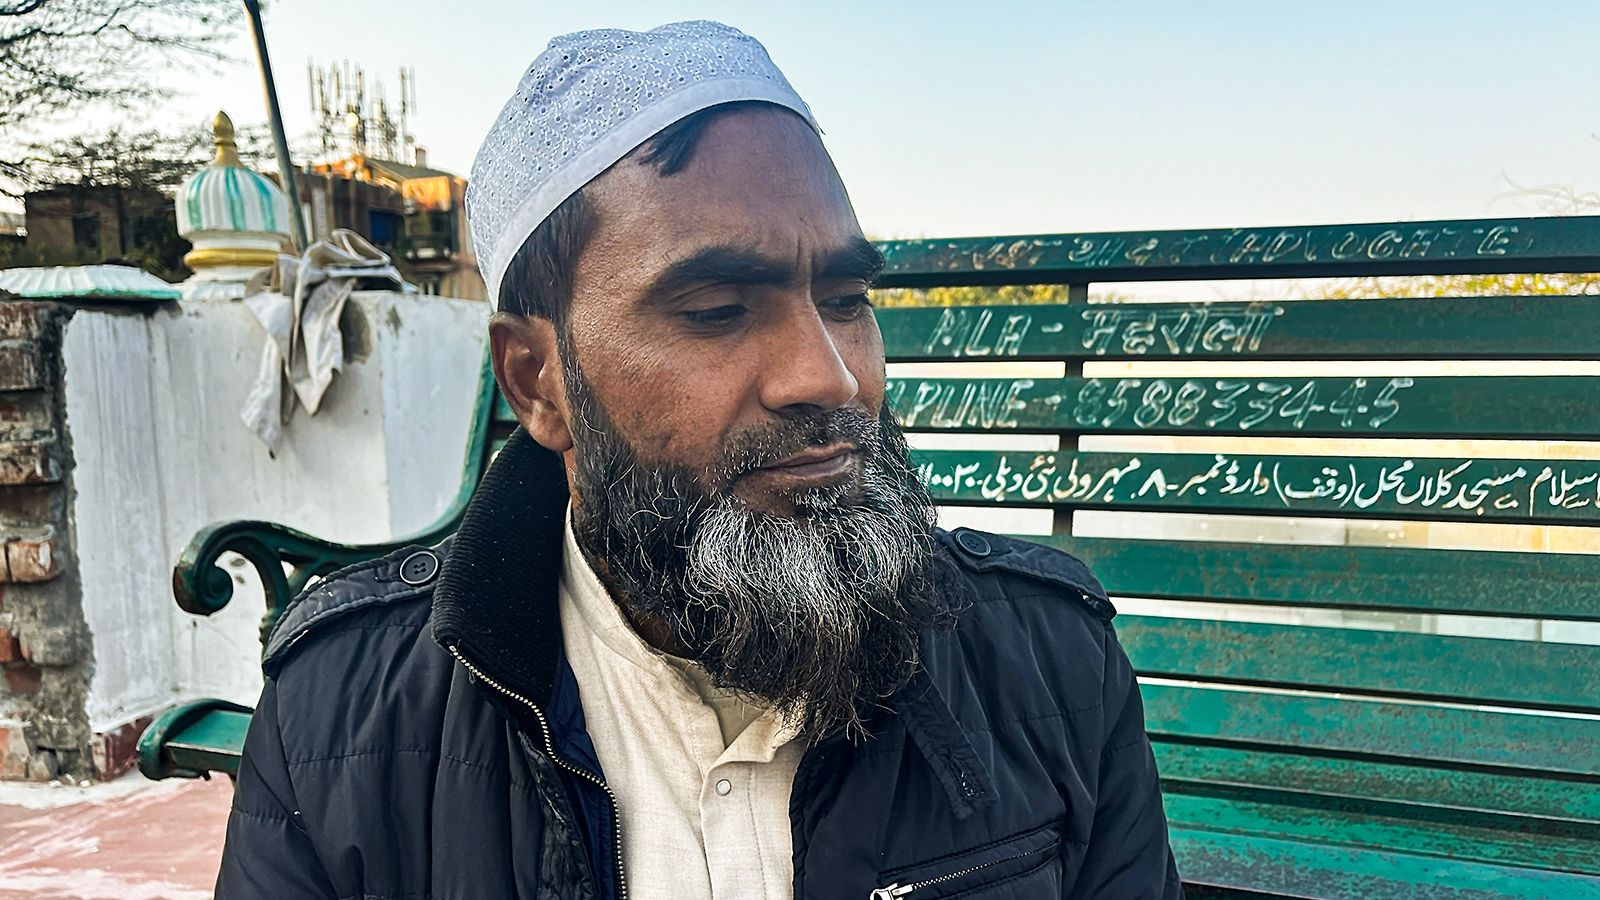 Mohammad Zakir Hussain has said he barely slept since the demolition of his mosque, the madrasa, and his home in India’s capital Delhi.